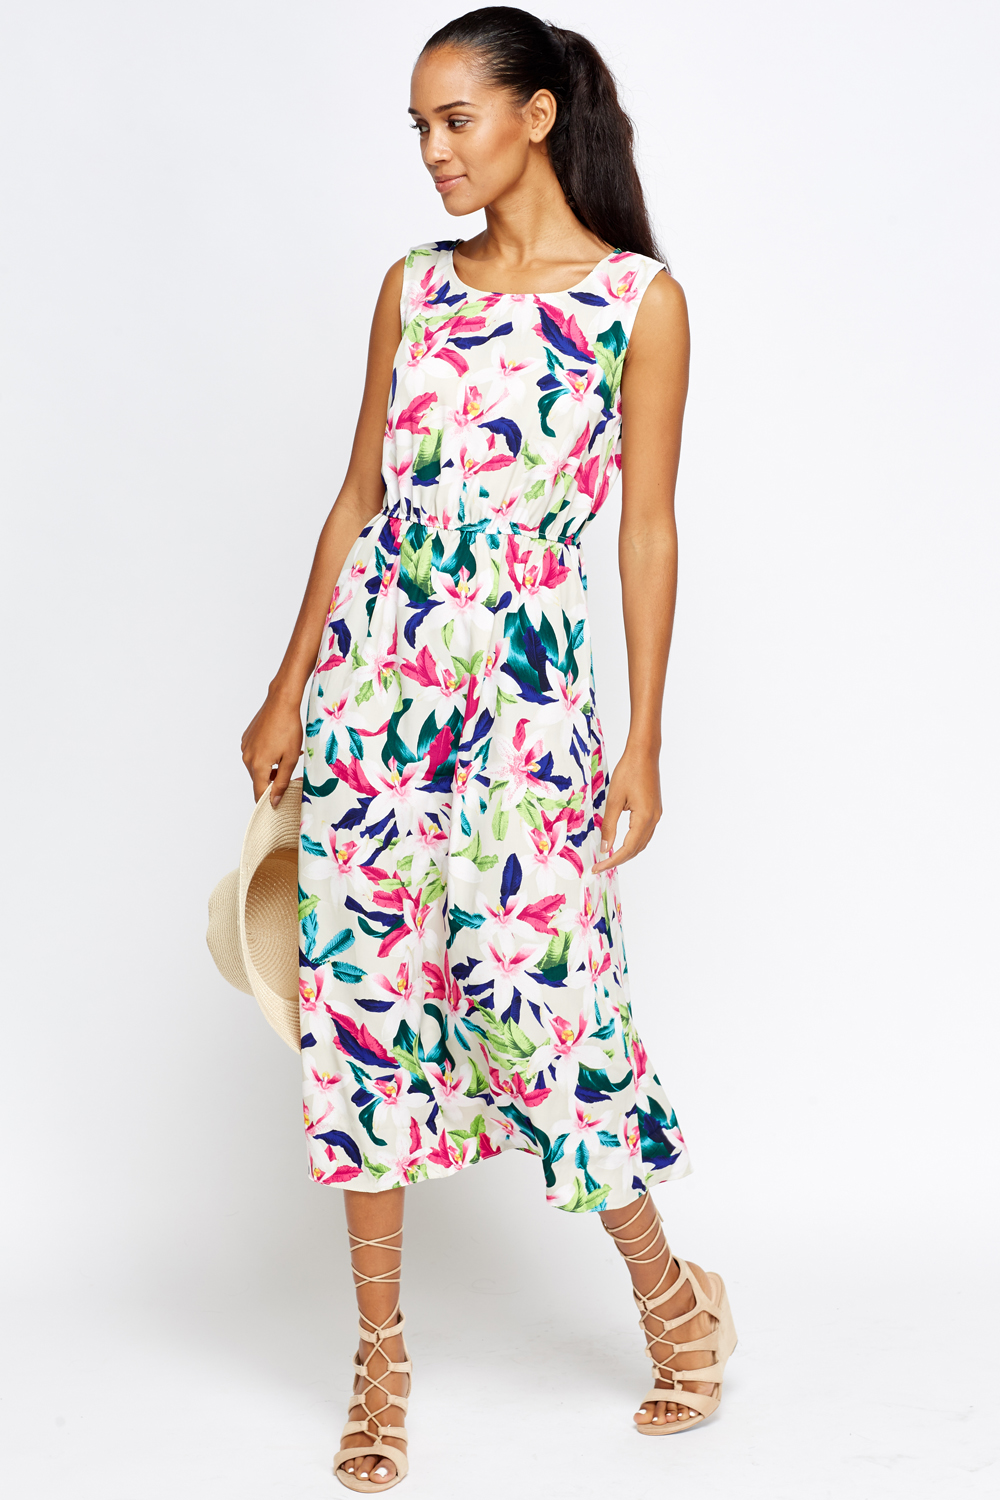 Summer Midi Dresses With Sleeves